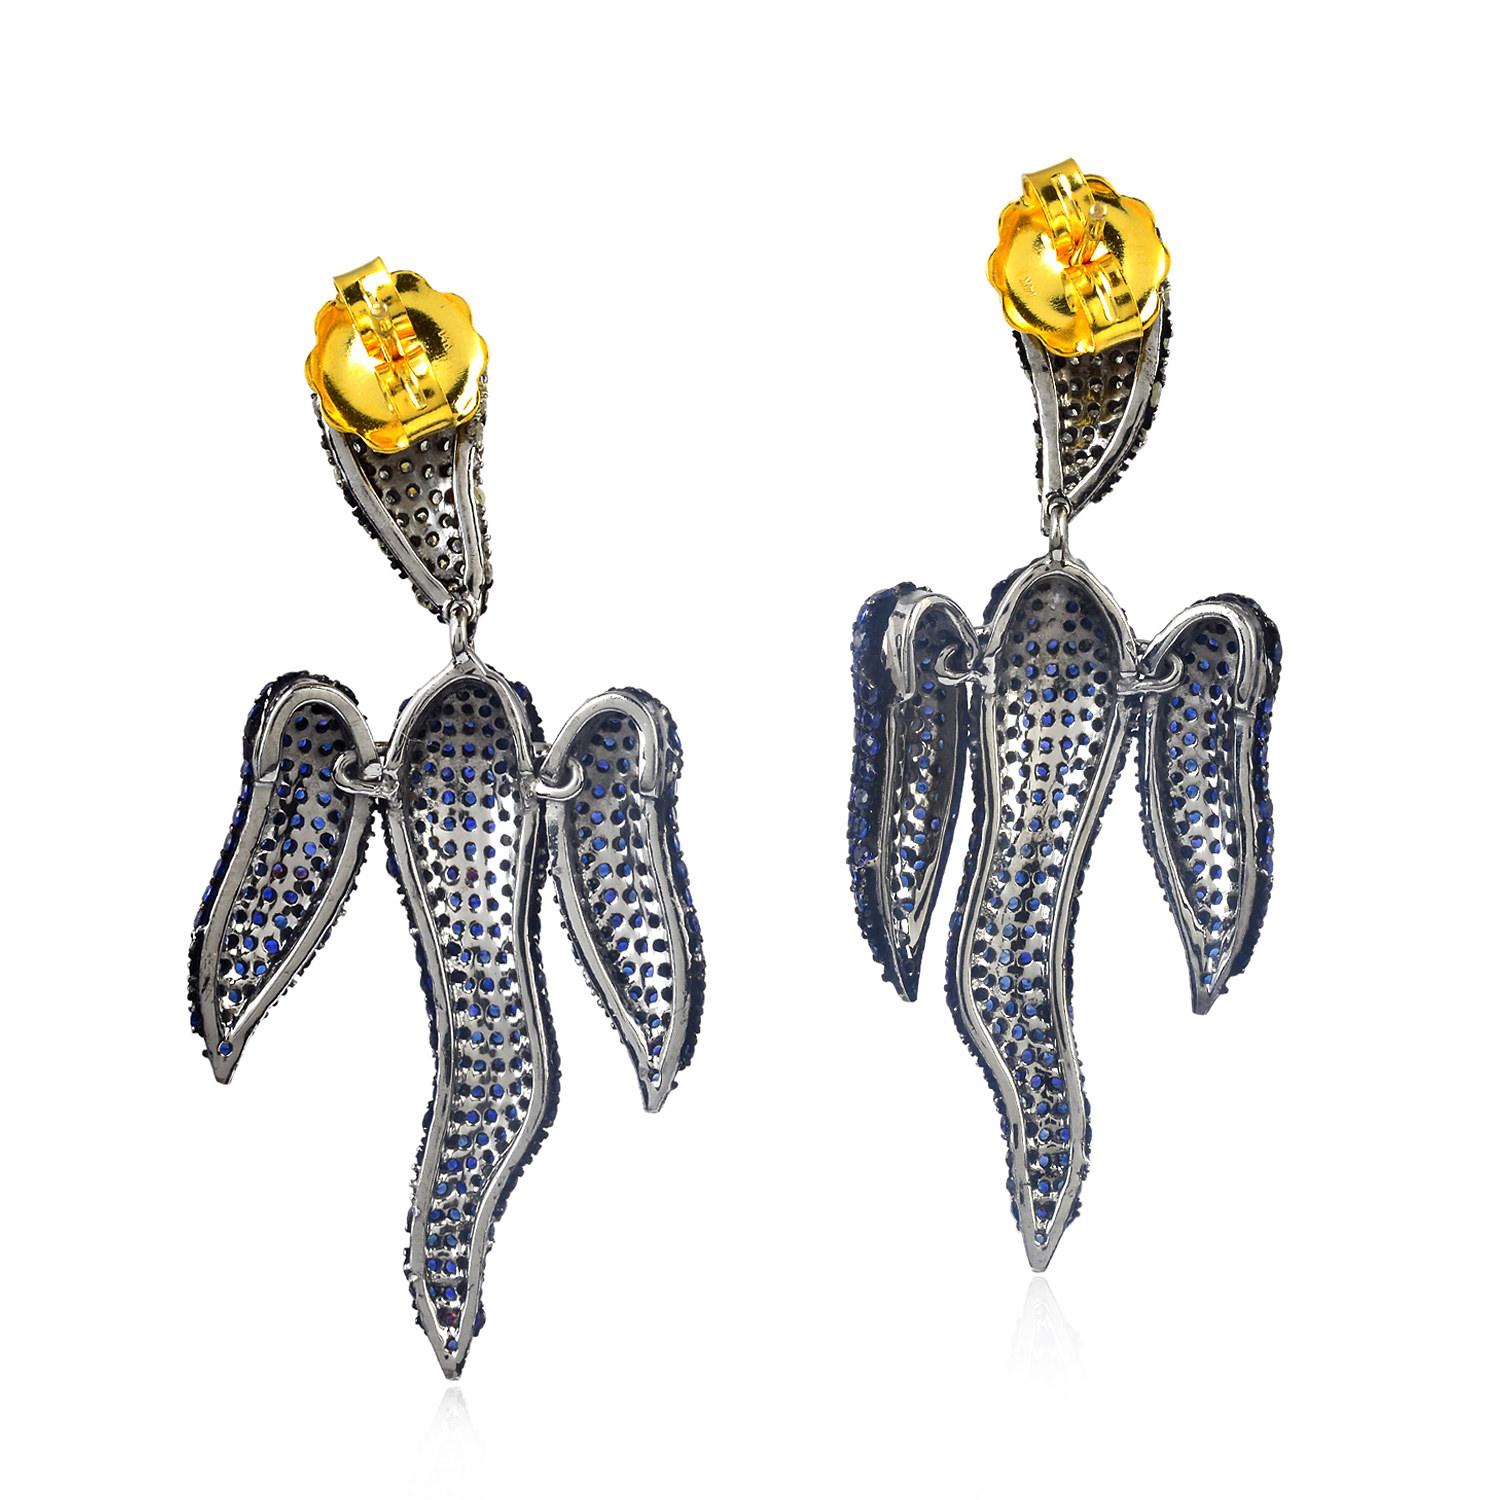 Cast in 14-karat gold & sterling silver, these beautiful drop earrings are set with 7.5 carats blue sapphire and 1.75 carats of sparkling diamonds. 

FOLLOW  MEGHNA JEWELS storefront to view the latest collection & exclusive pieces.  Meghna Jewels